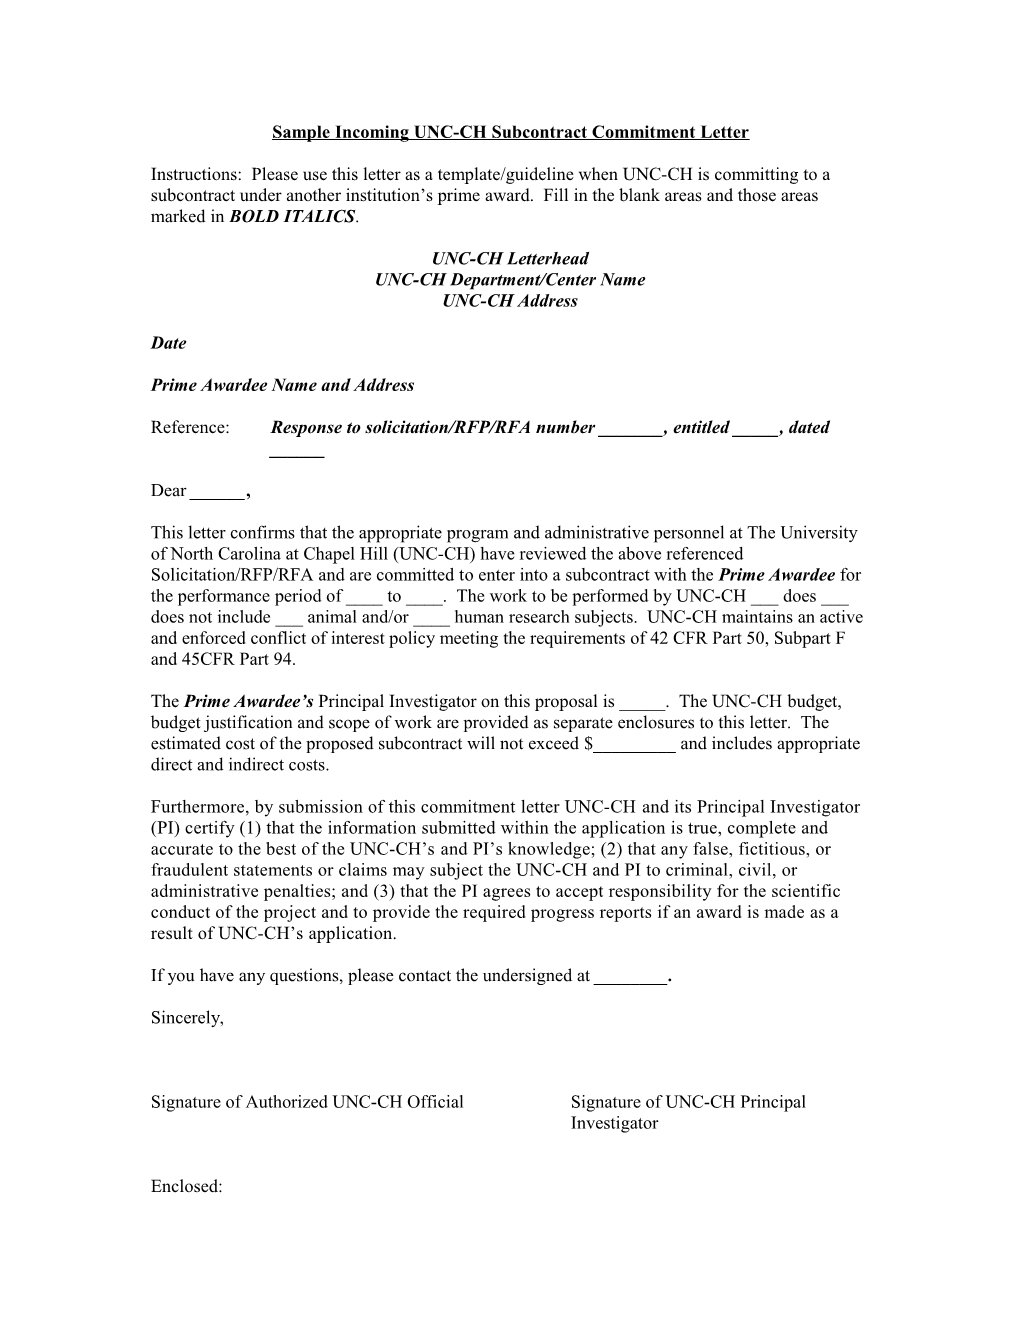 Sample Outgoing UNC-CH Subcontract Commitment Letter